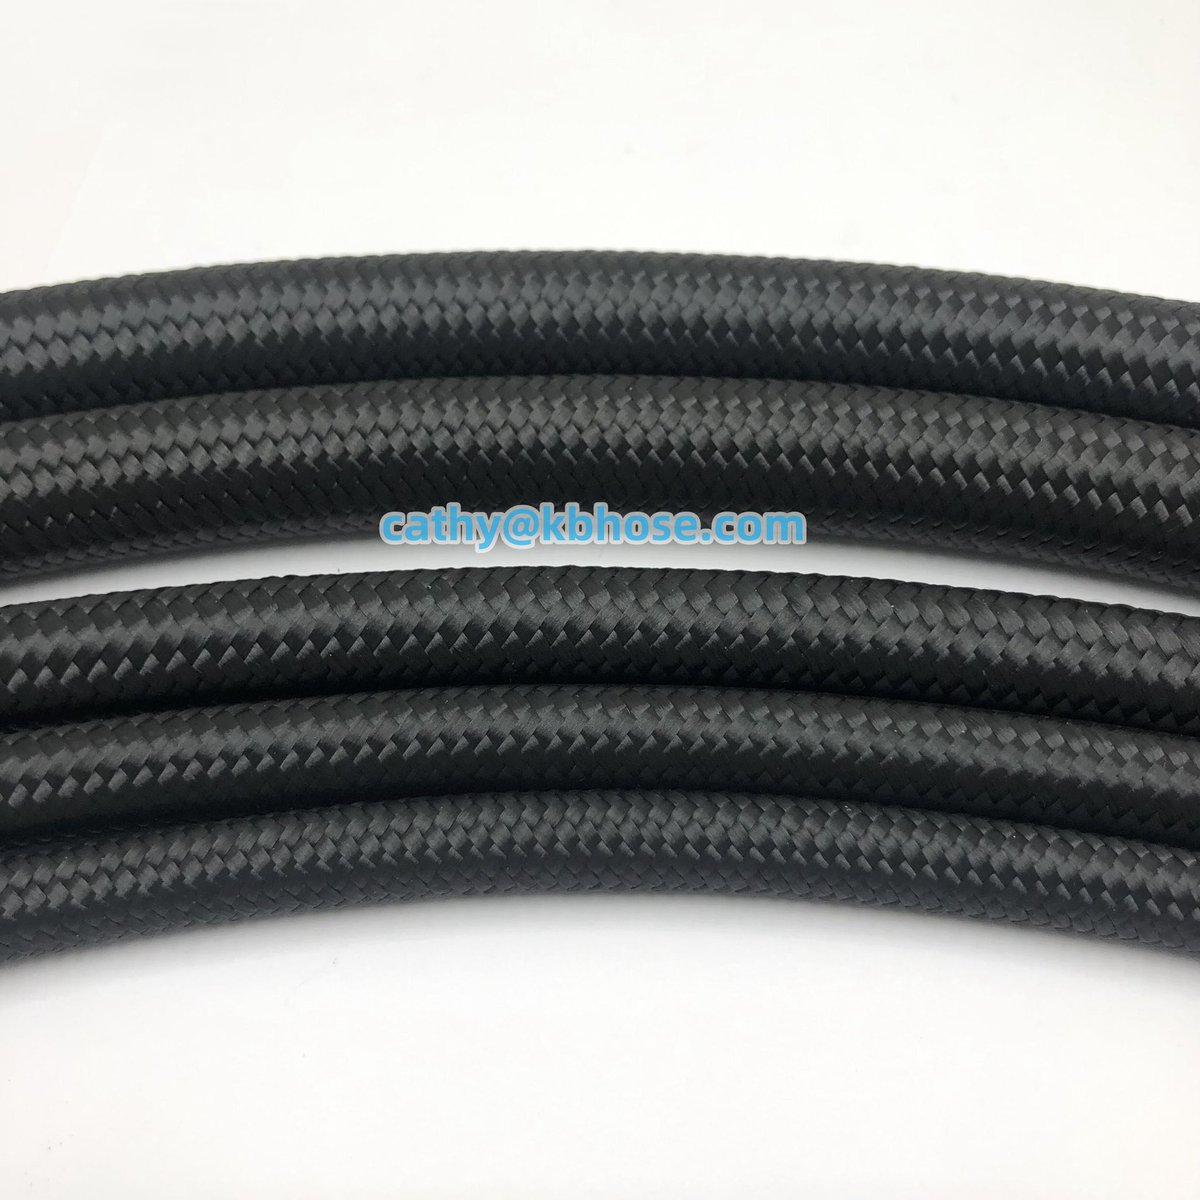 AN4 AN6 AN8 AN10 AN12 AN16 AN20 nylon stainless steel braided hose

#racing #braidedhose #fuelhose #oilcooler #rubberhose #fuelsystem #anhose #fuelline #turbo #turbocars #anfitting #nyloncoated #nylonlinebraidedhose #braidedoilhose #cpe #stainlesssteelbraidedhose